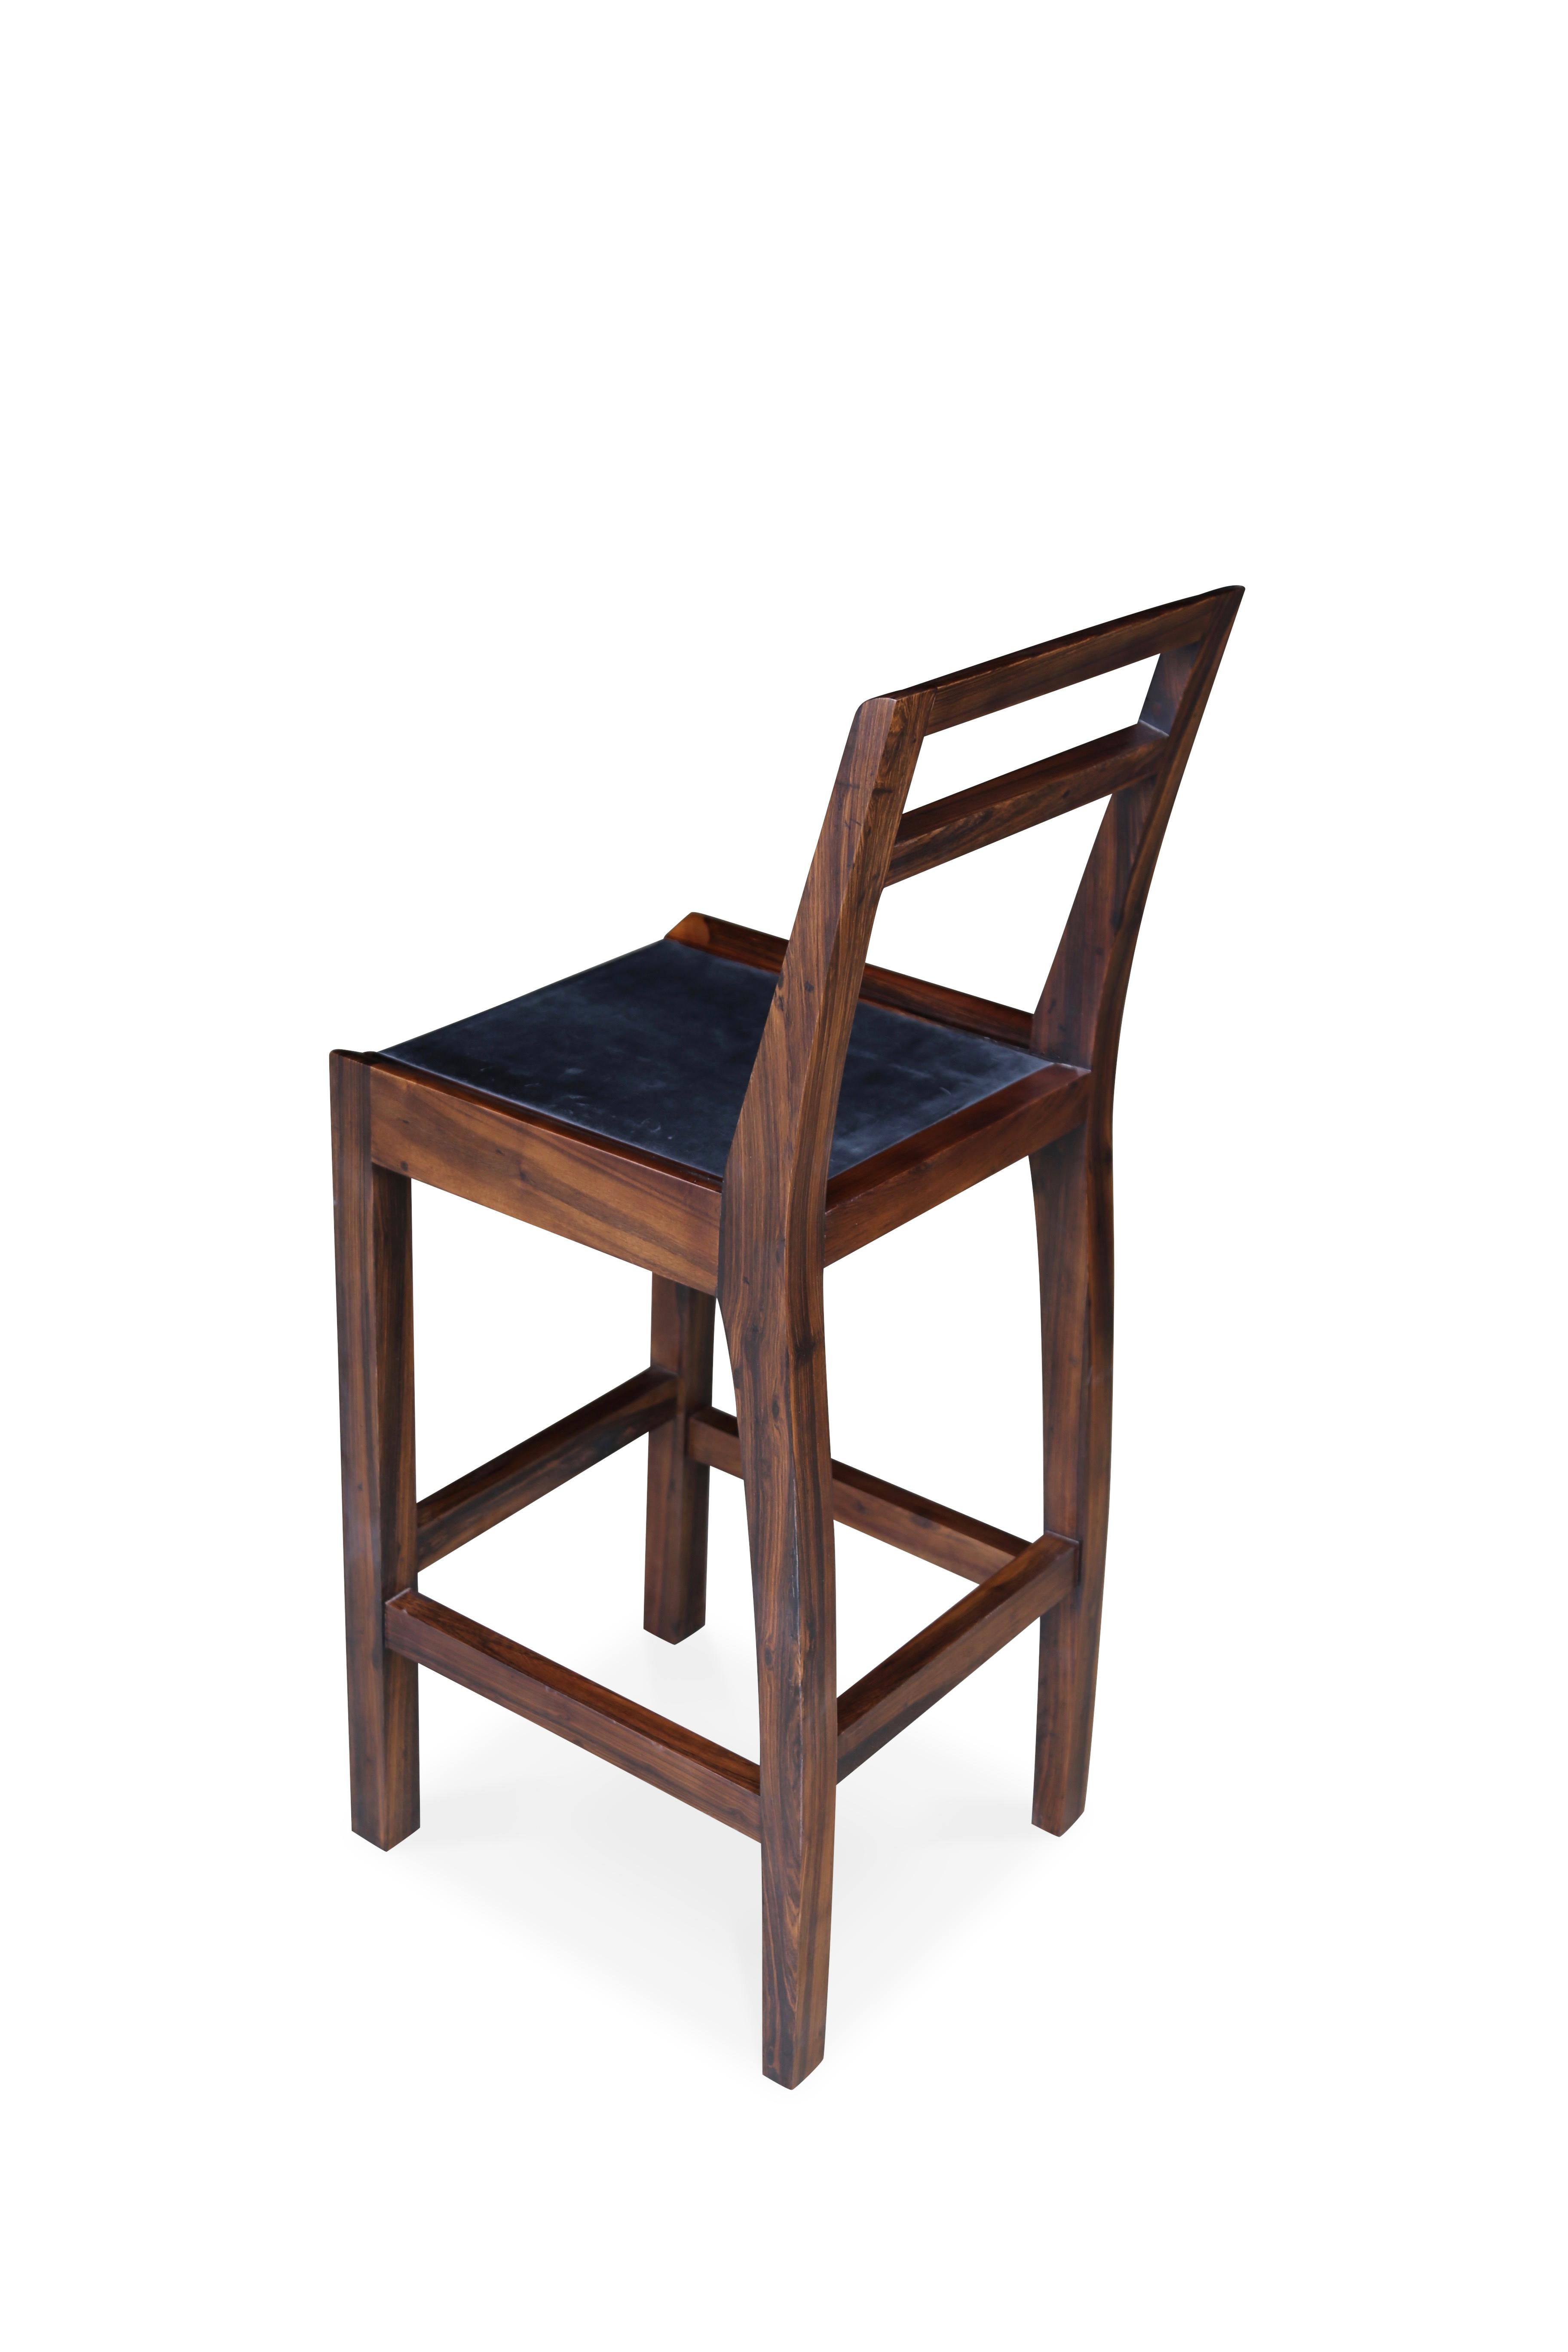 Orianna Stool in Argentine Rosewood and Wrapped Leather from Costantini 4